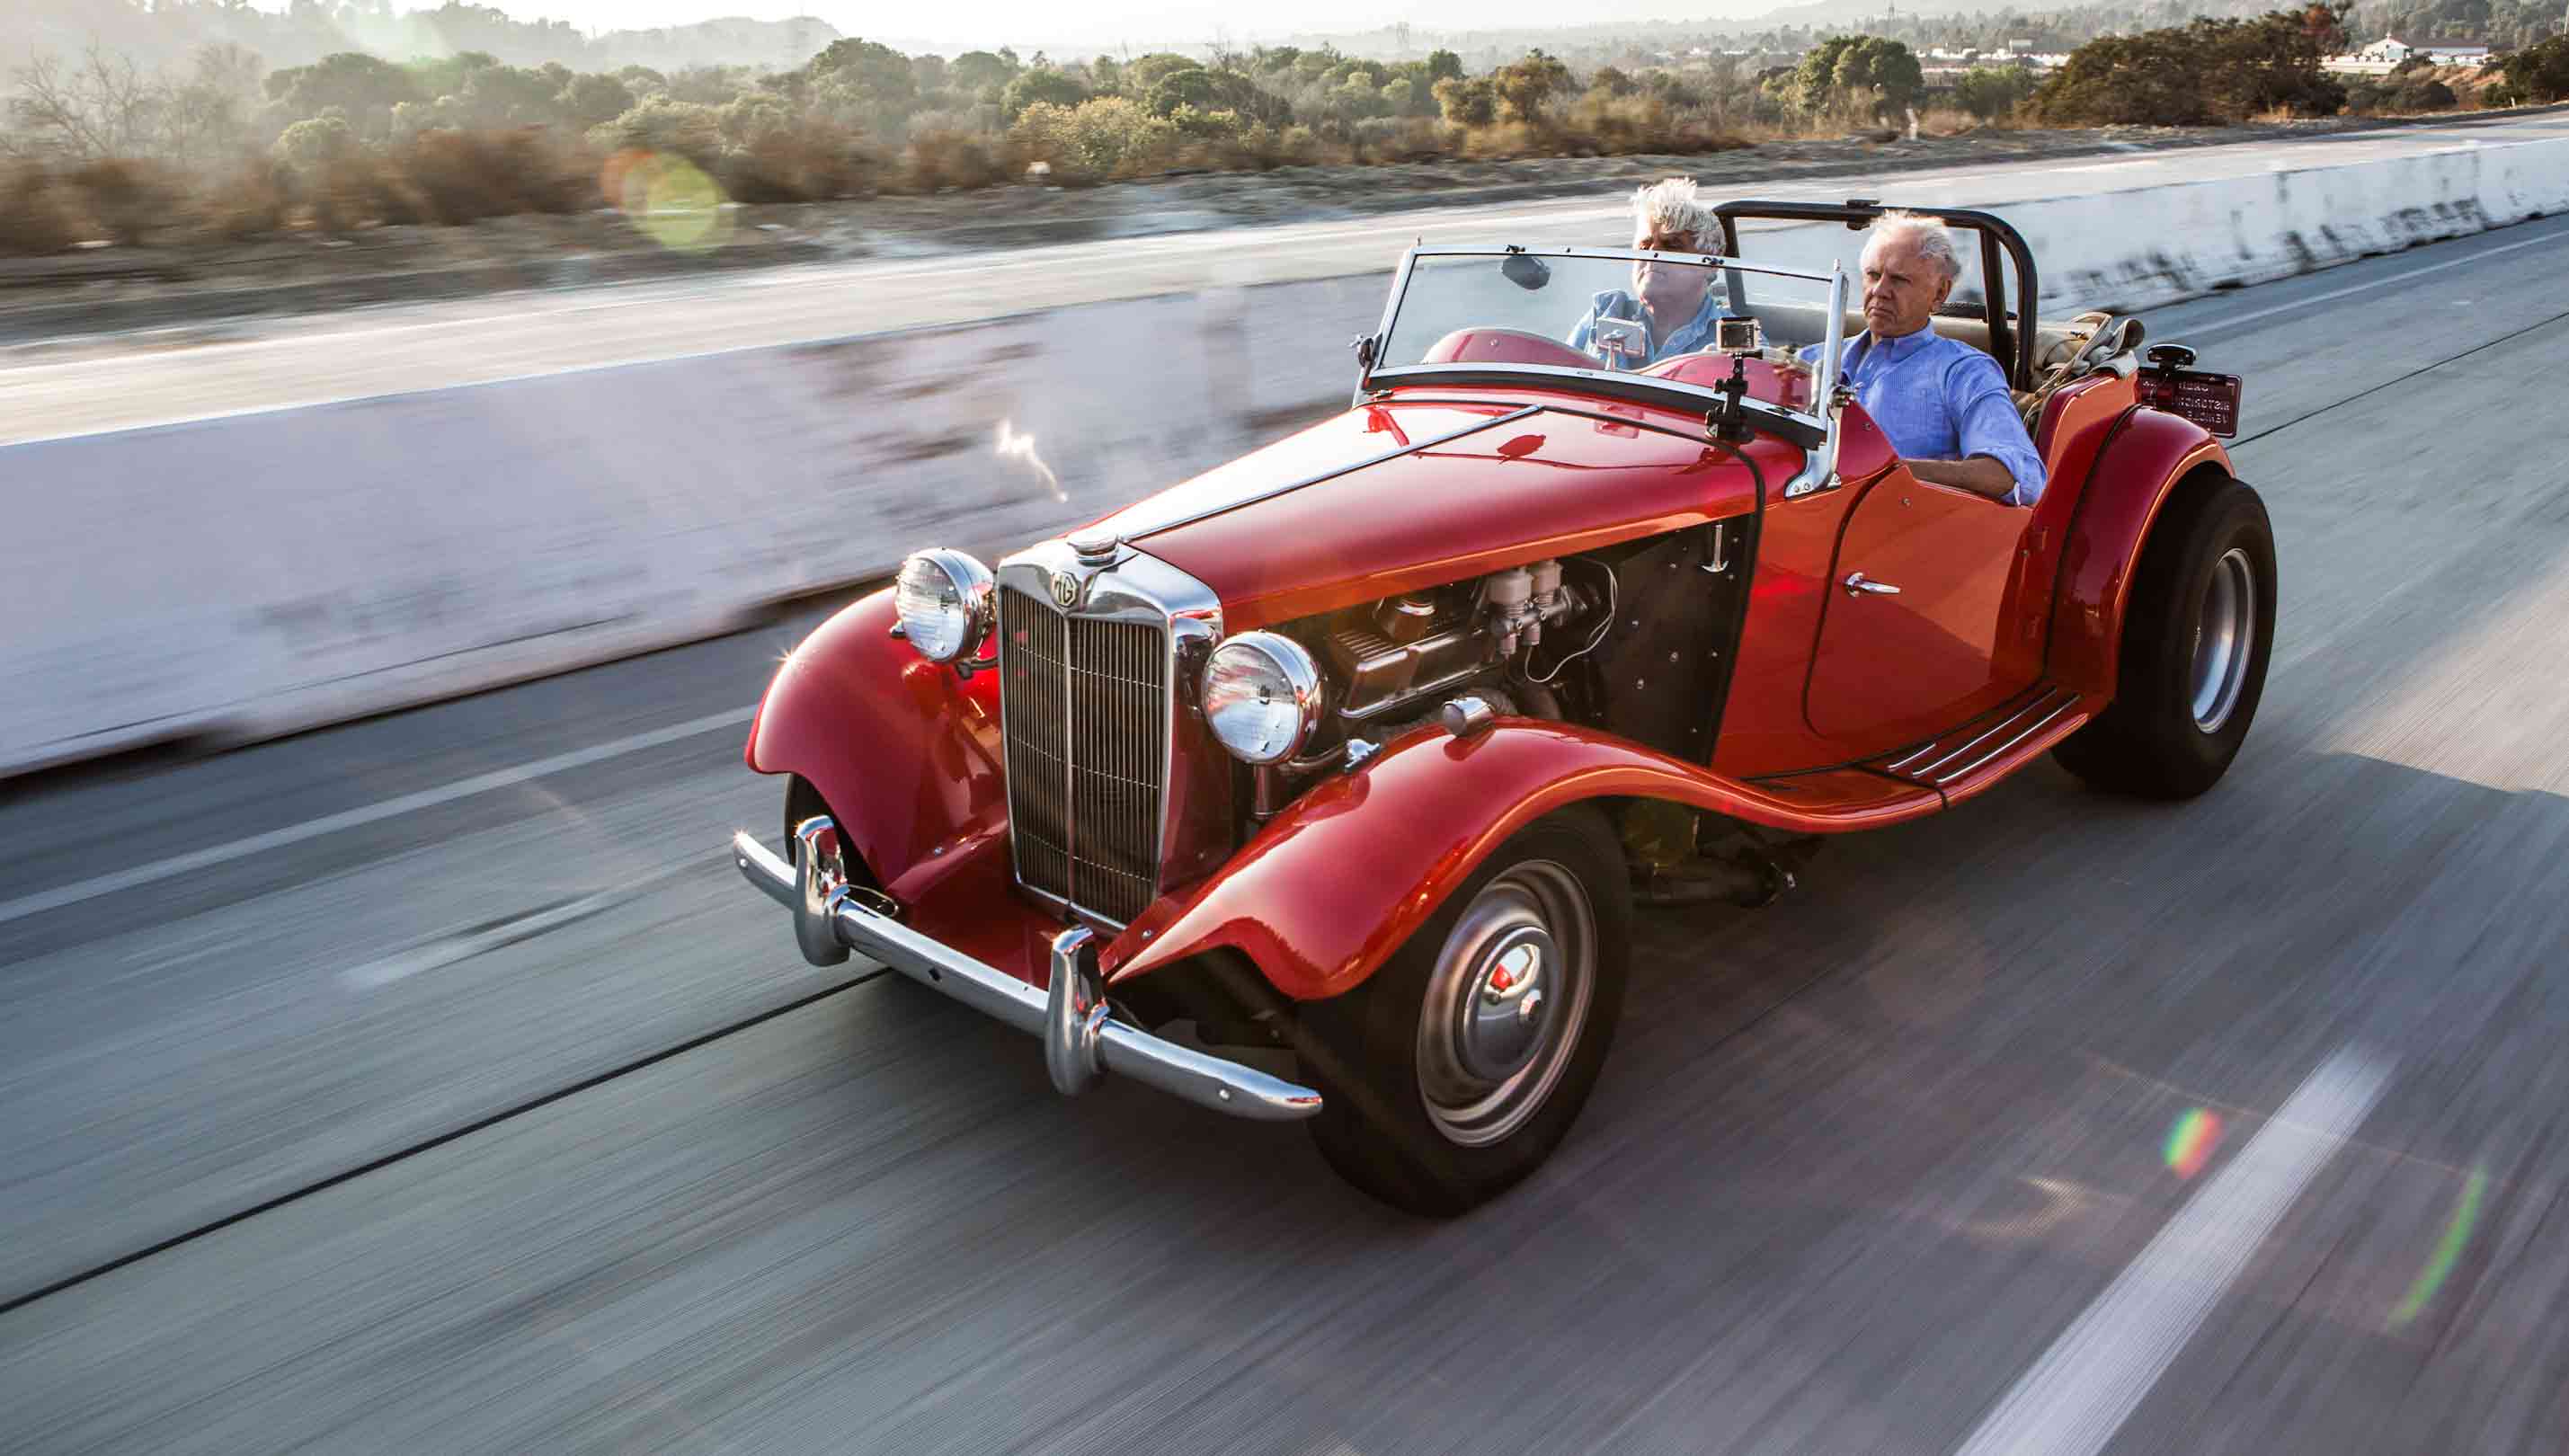 10 Cars In Jay Leno’s Garage Add Incredible Value To His Car Collection